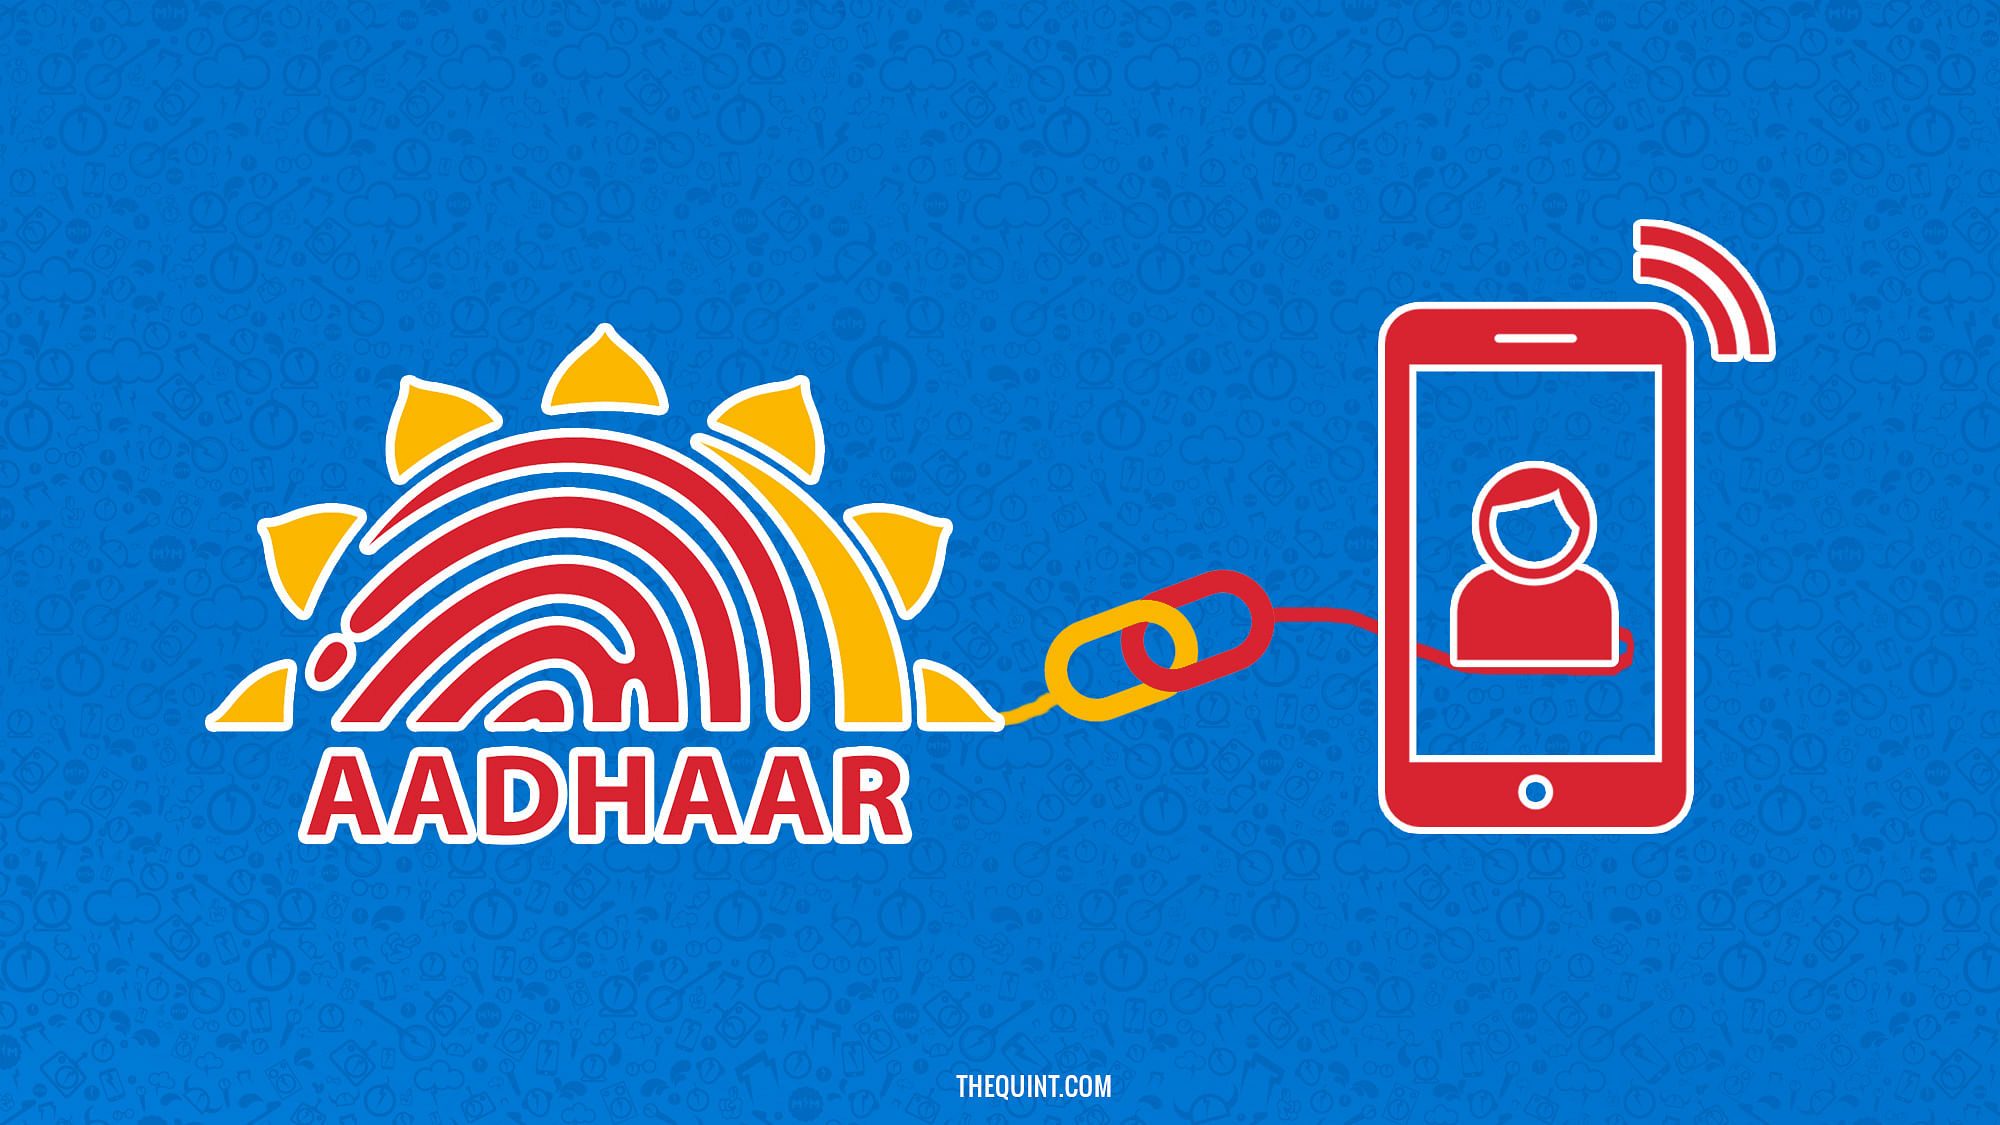 Department of Telecommunications has extended the date for the mobile linking to Aadhaar to 1 January